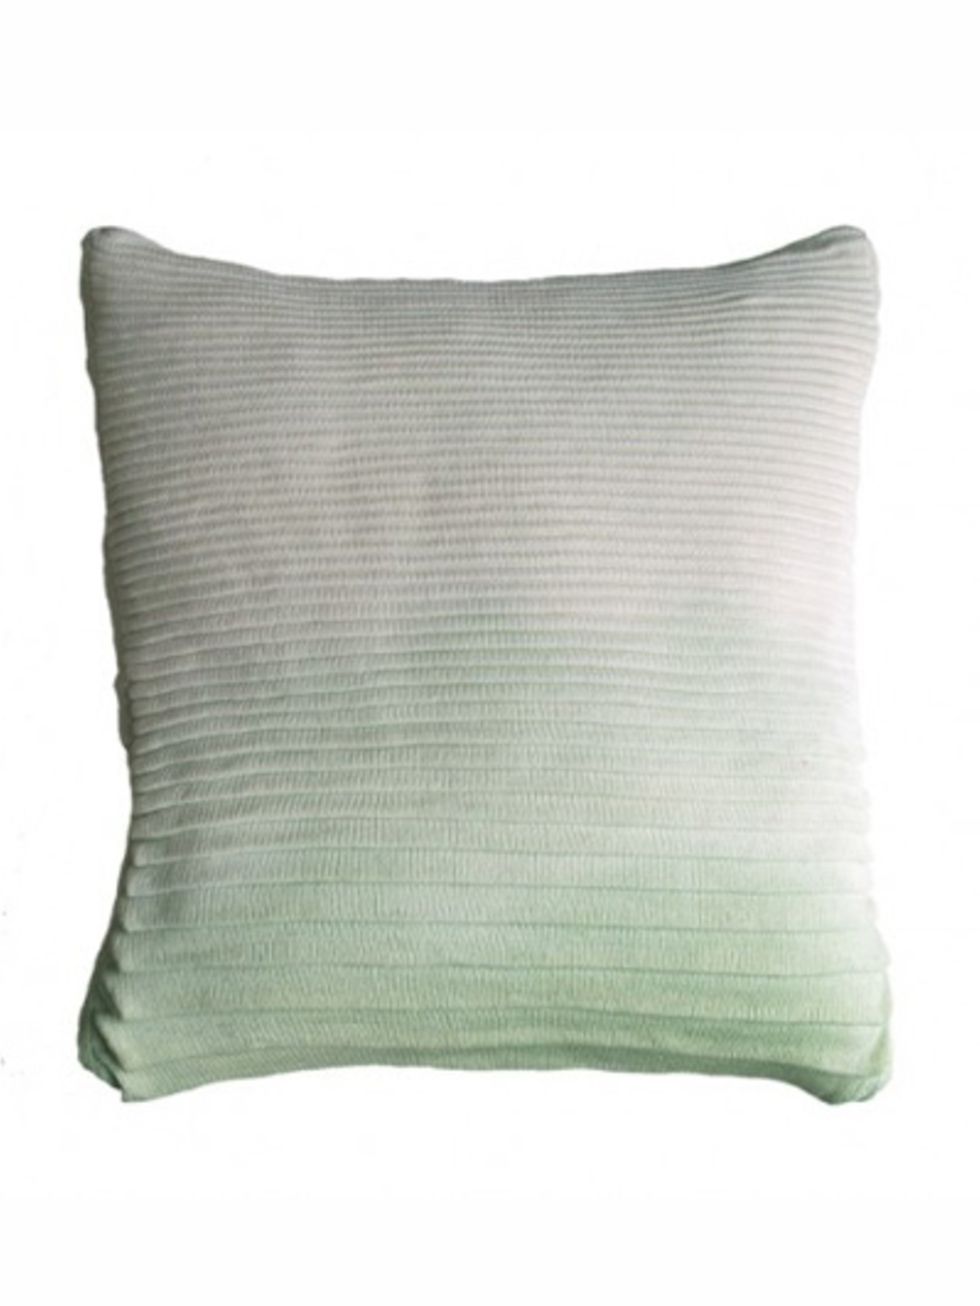 Green, Textile, Cushion, Pillow, Throw pillow, Teal, Grey, Home accessories, Turquoise, Linens, 